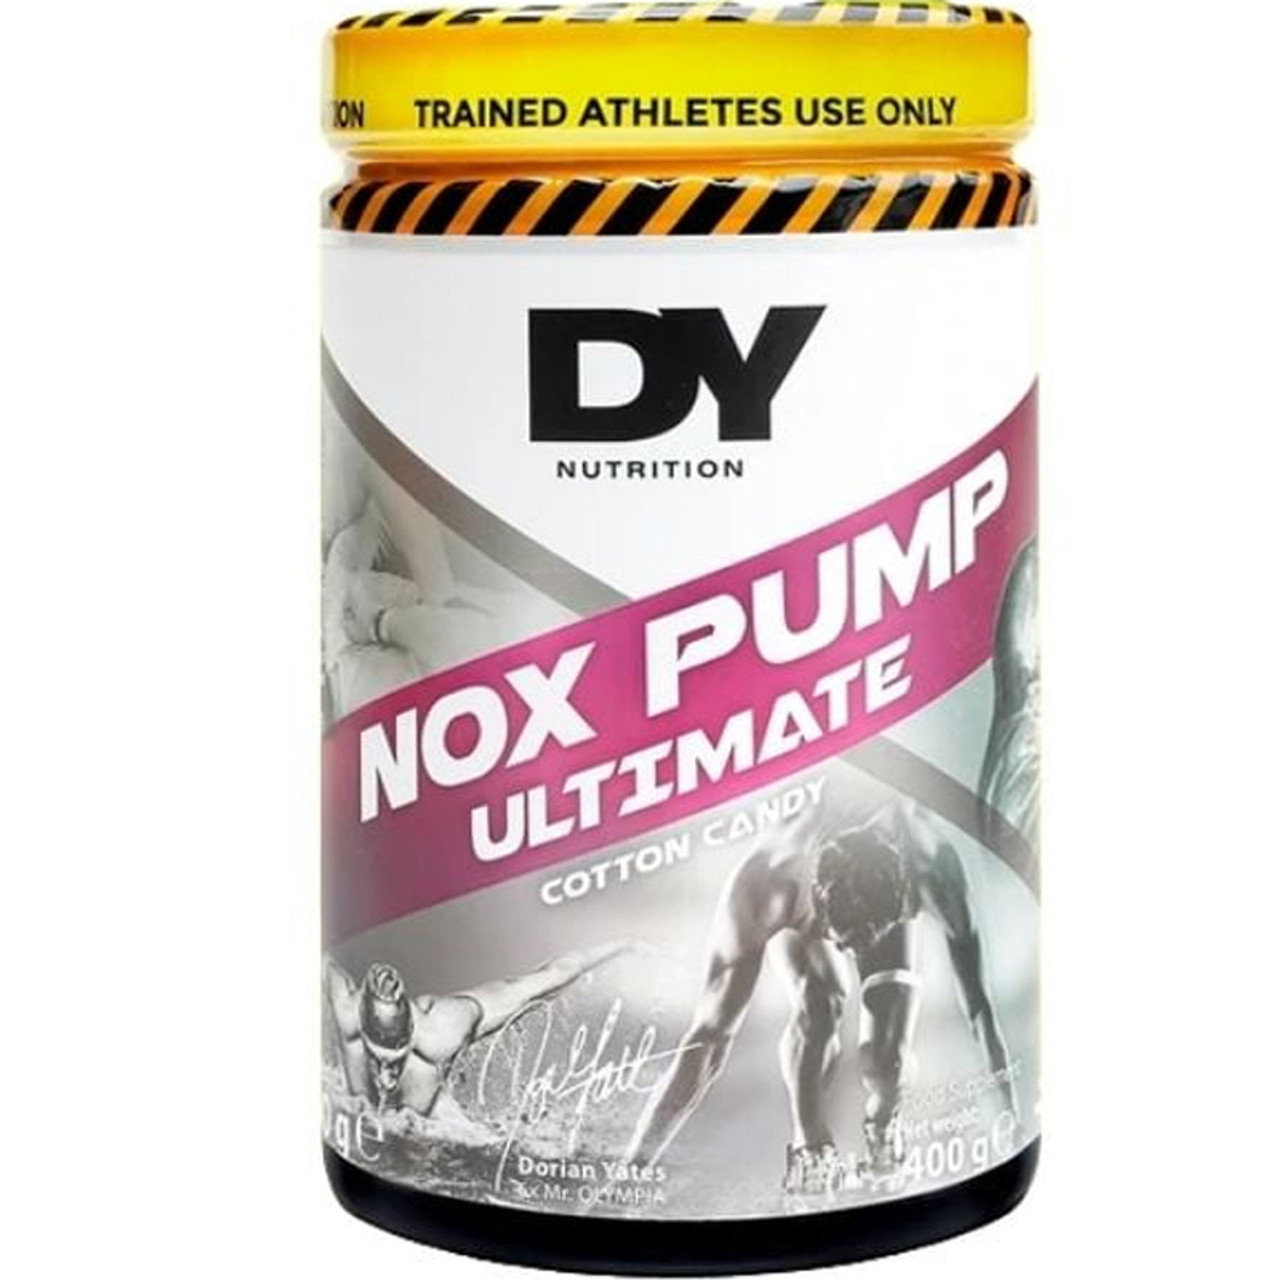 Dy Nutrition - NOX PUMP Ultimate - Extreme Pre Workout Cotton Candy